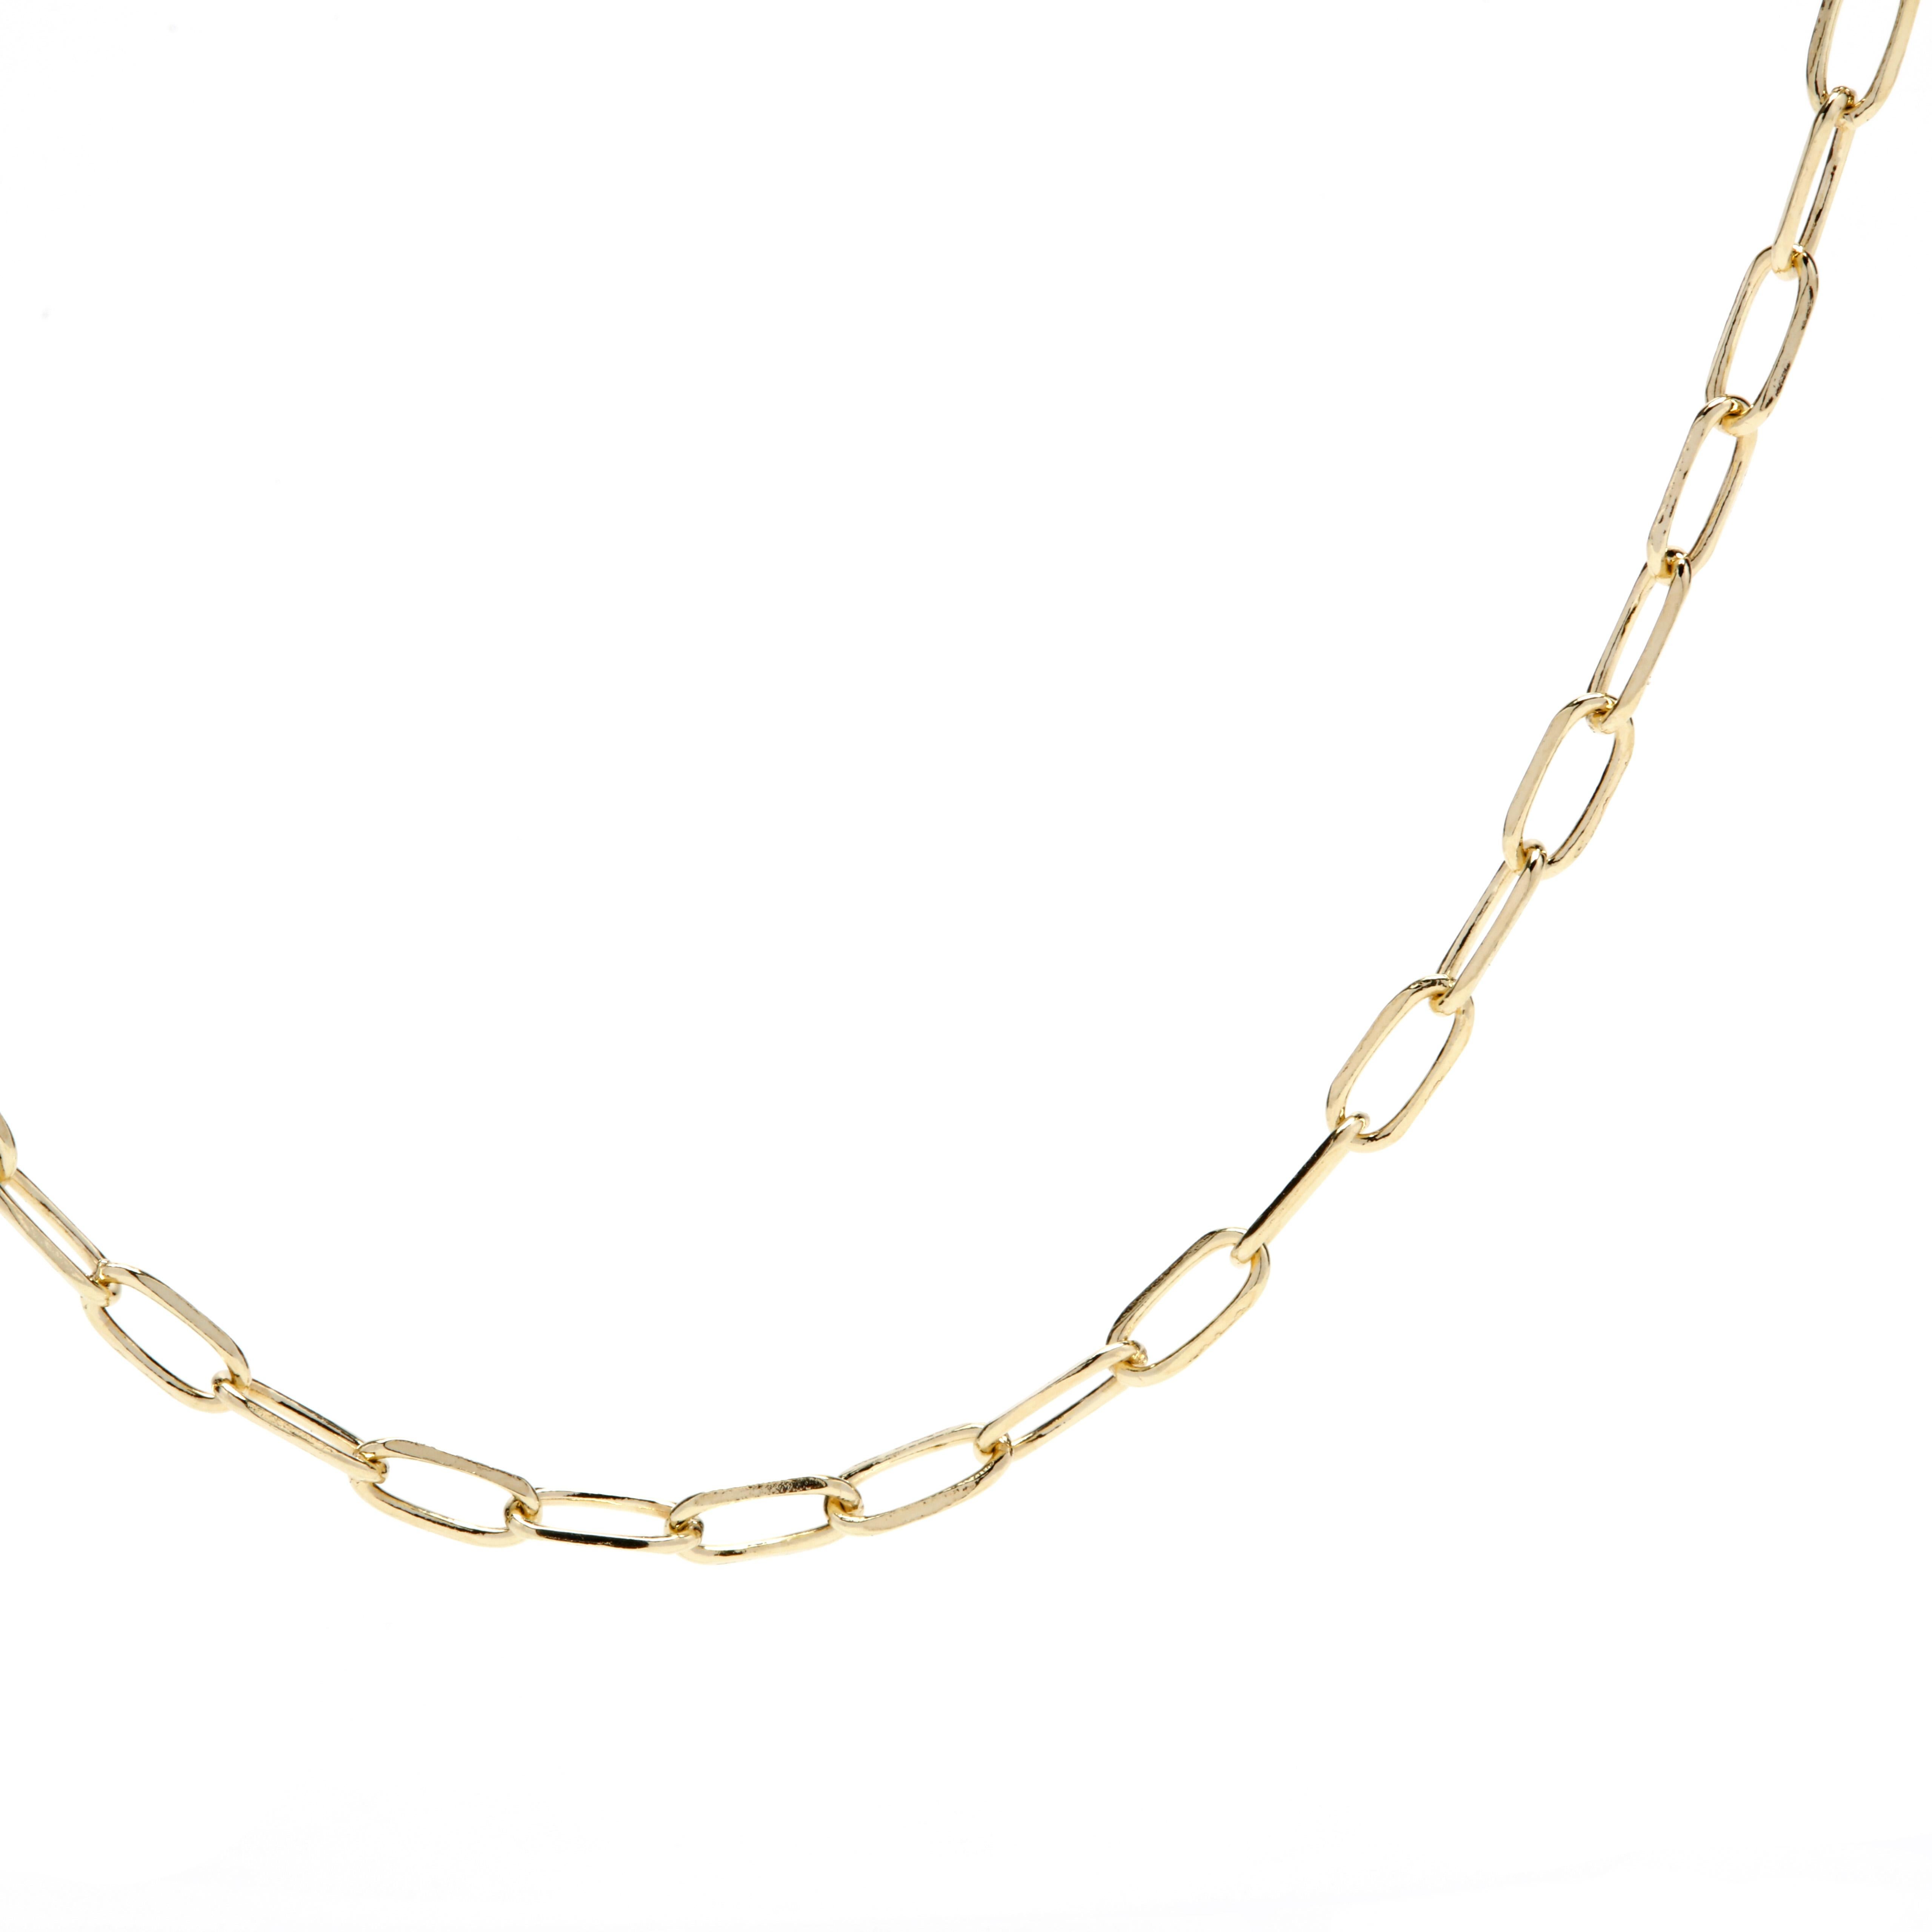 A petite and luxurious Italian 14 karat yellow gold paper clip chain necklace. This gold chain showcases a dainty and delicate elongated oval design with a lobster clasp.  A great addition for everyday or special occasion wear.  Wear this necklace